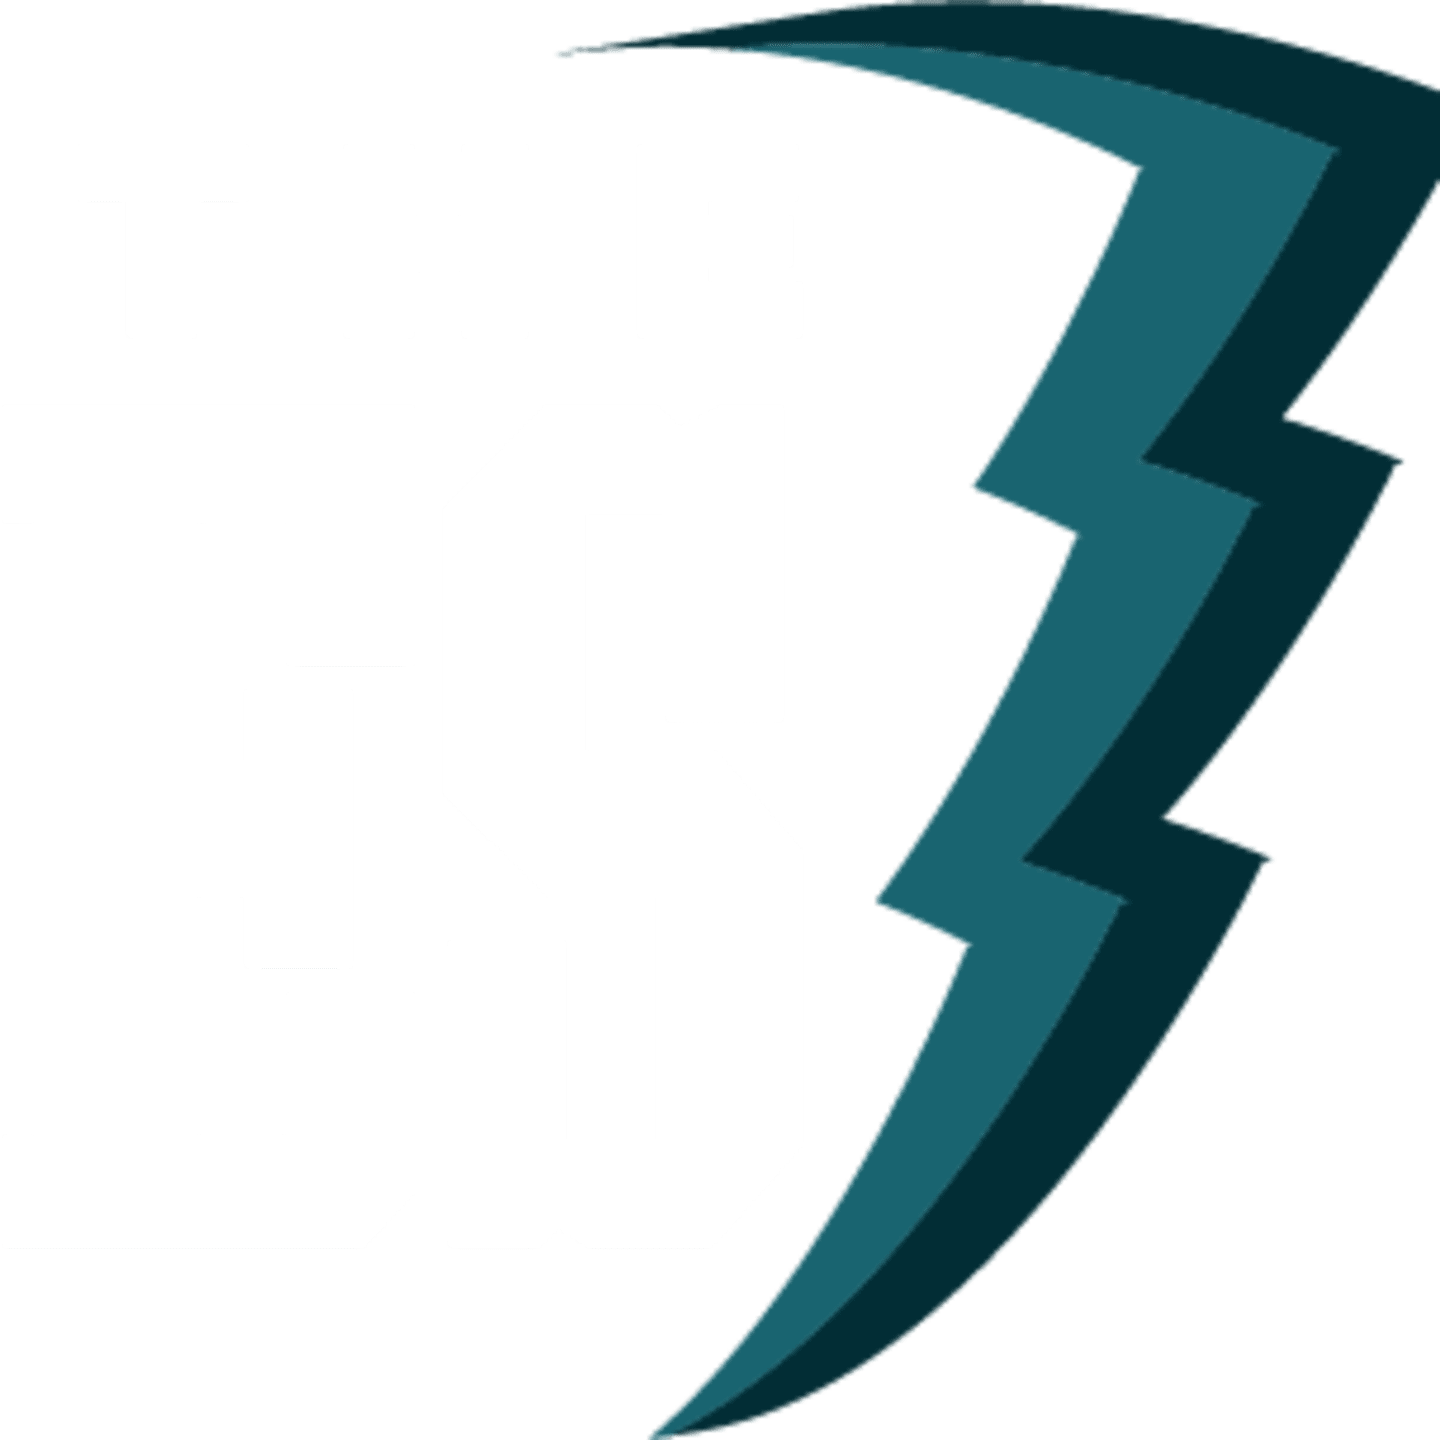 Inside The Iggles on X: #EaglesNation, We at @InsideIggles want